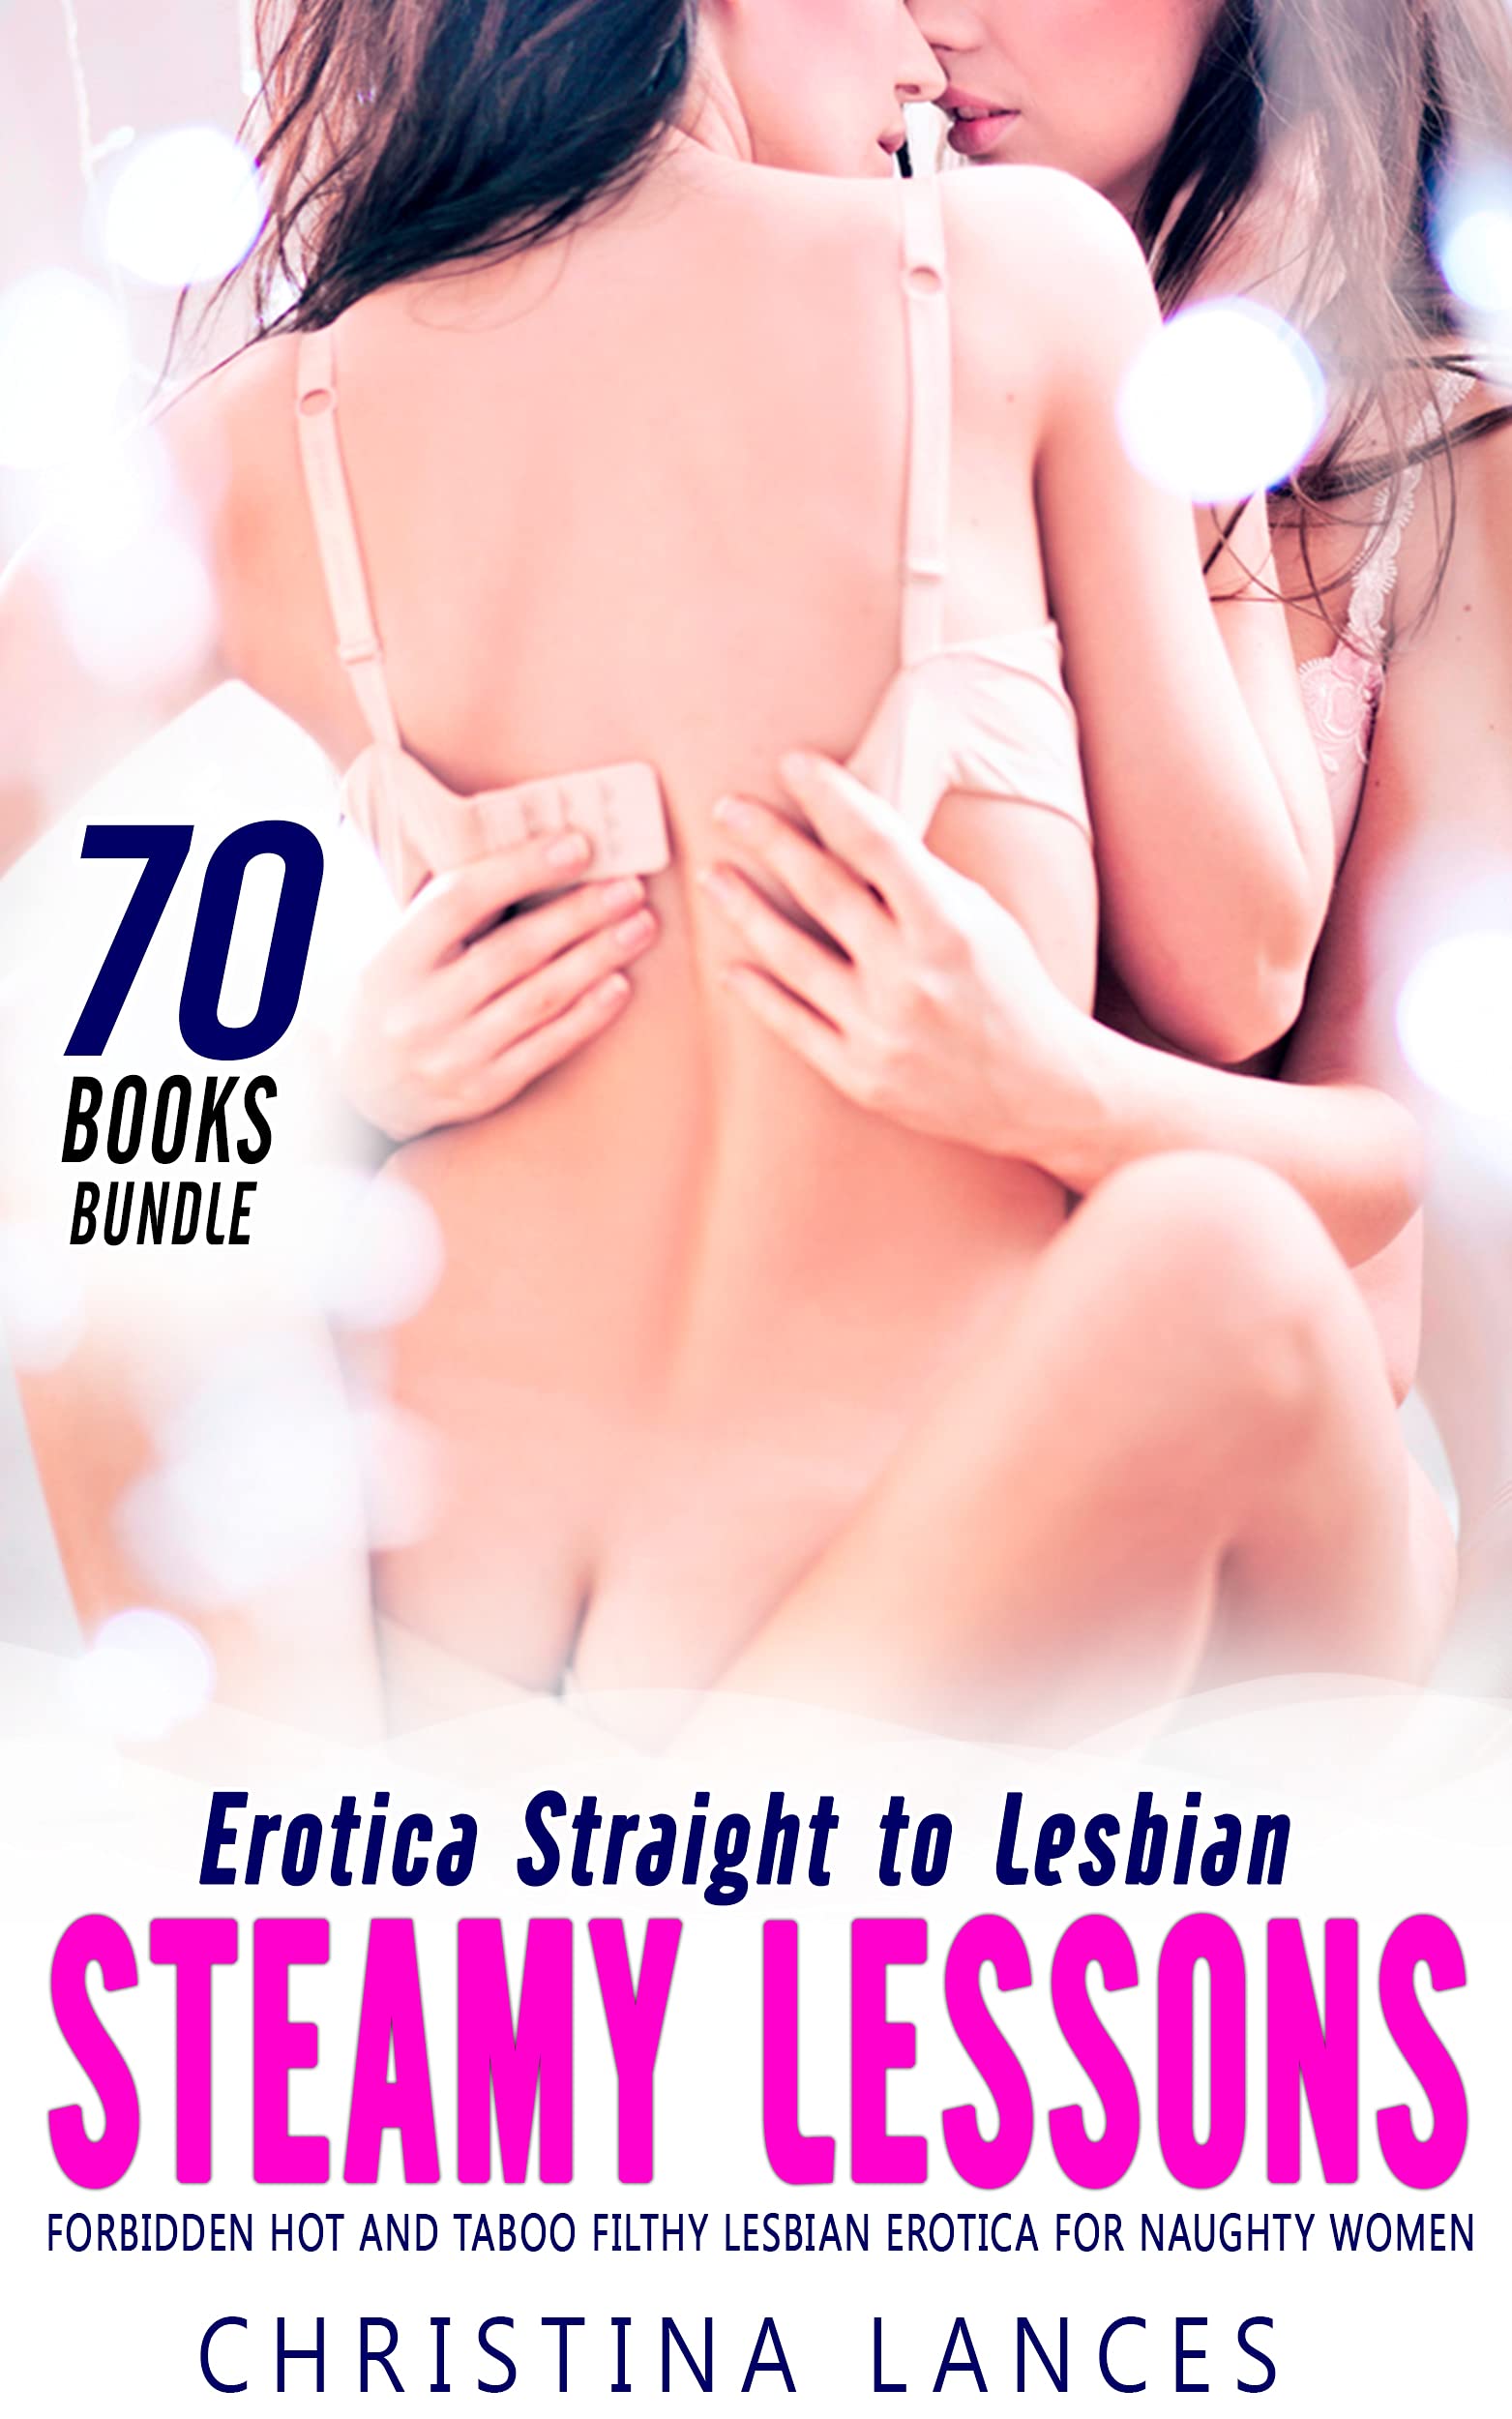 aditya dangwal recommends Straight Seduced By Lesbian